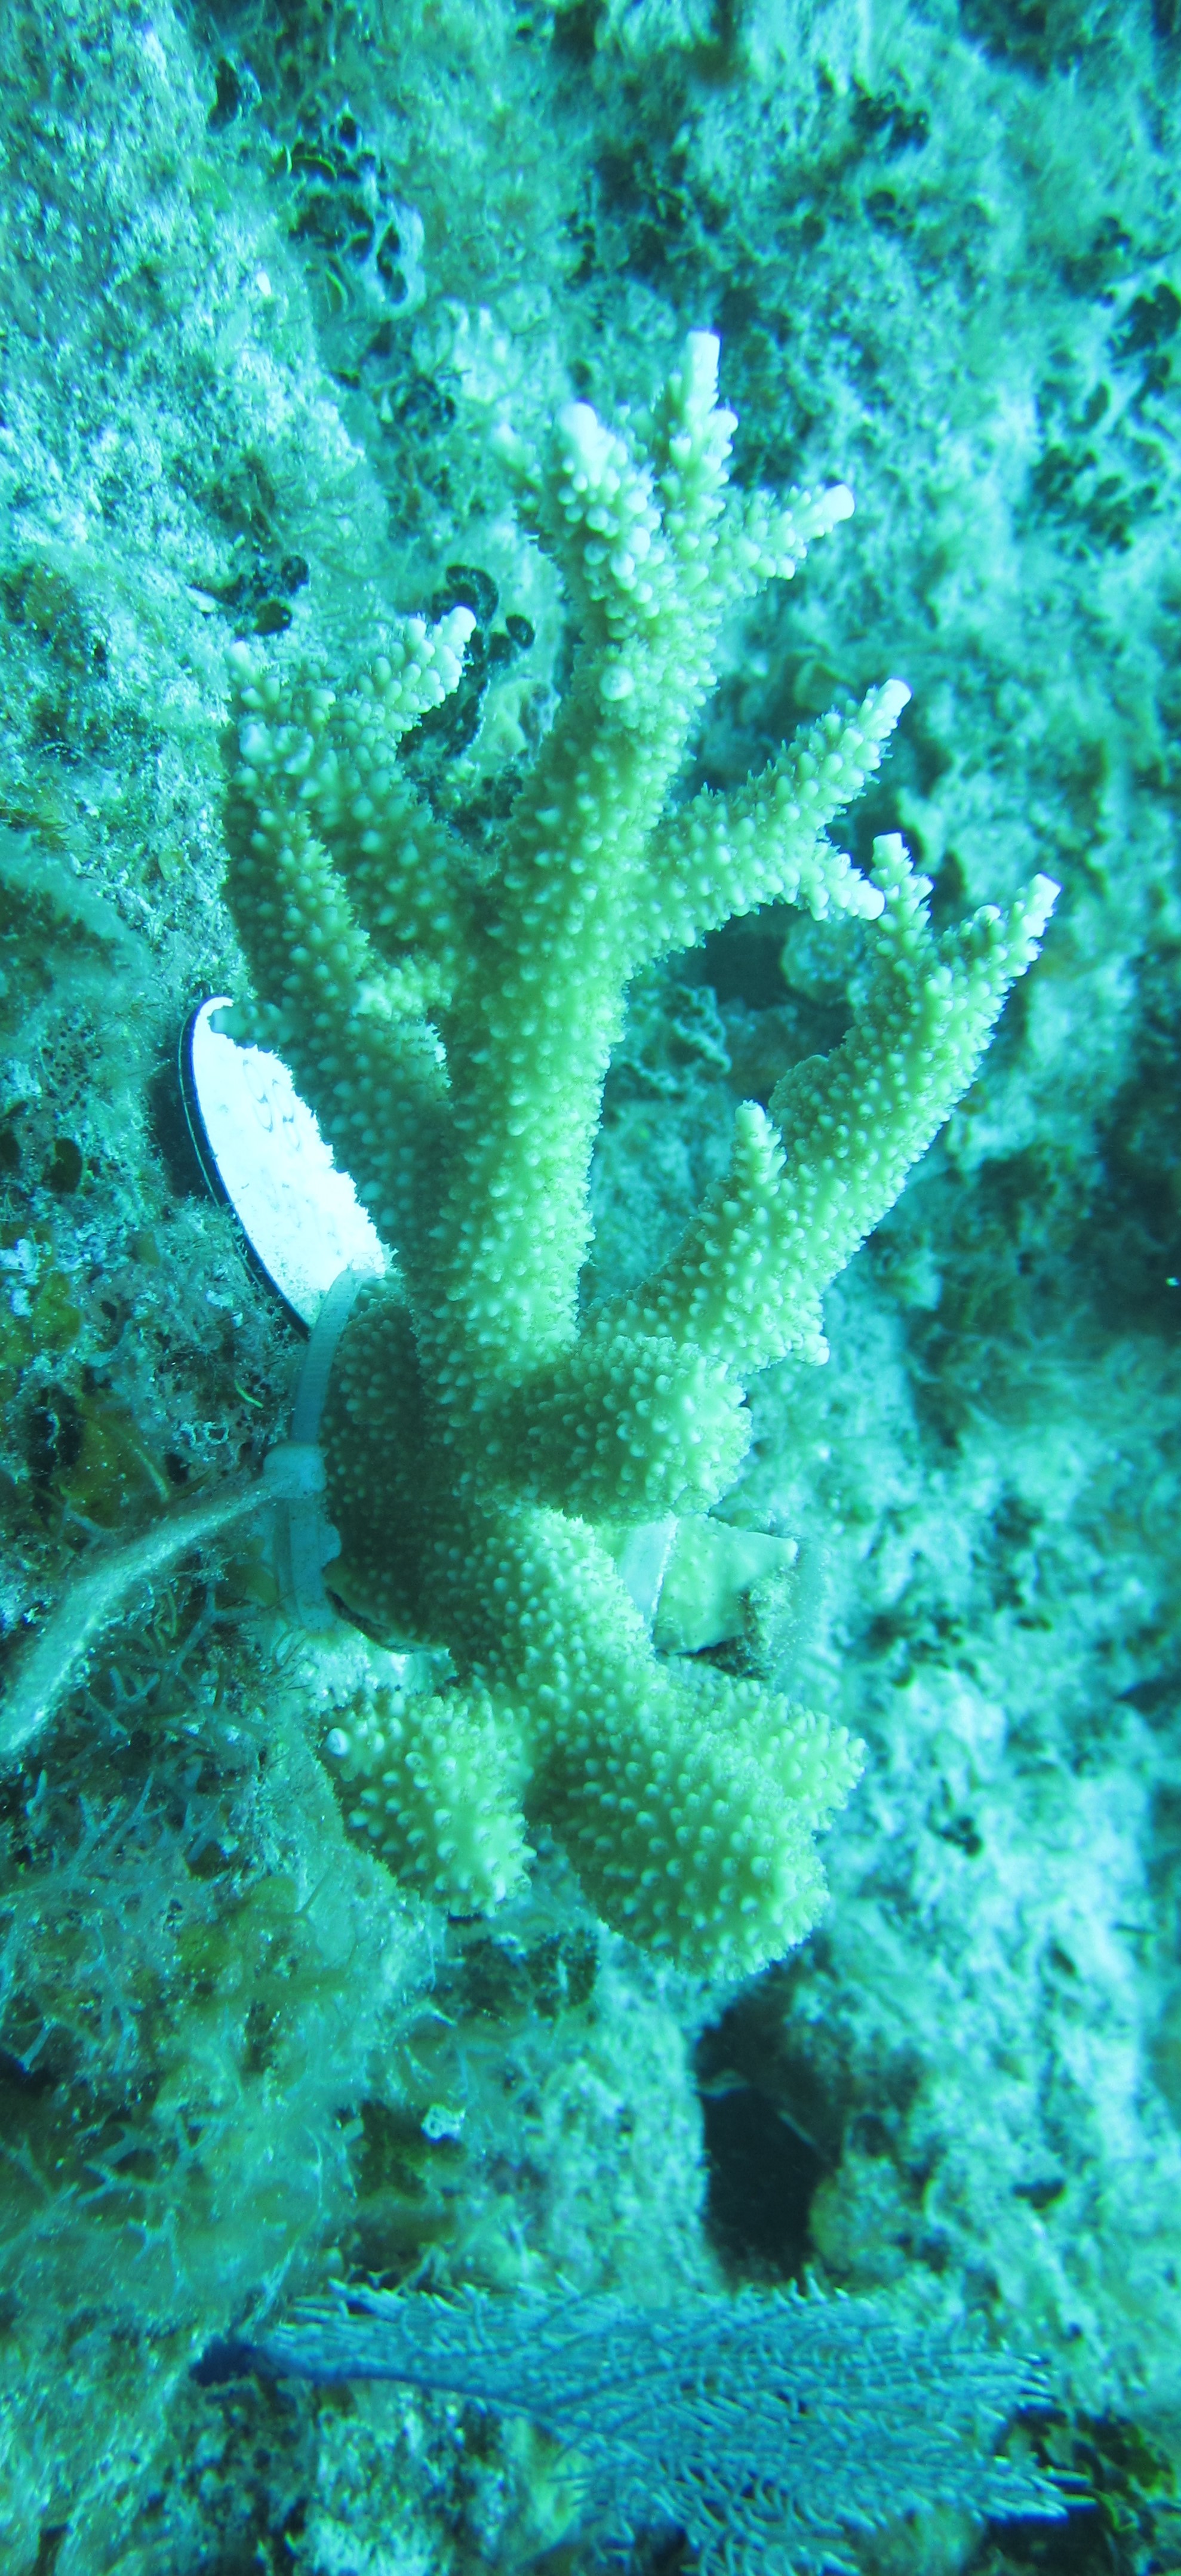 An outplanting of staghorn coral.